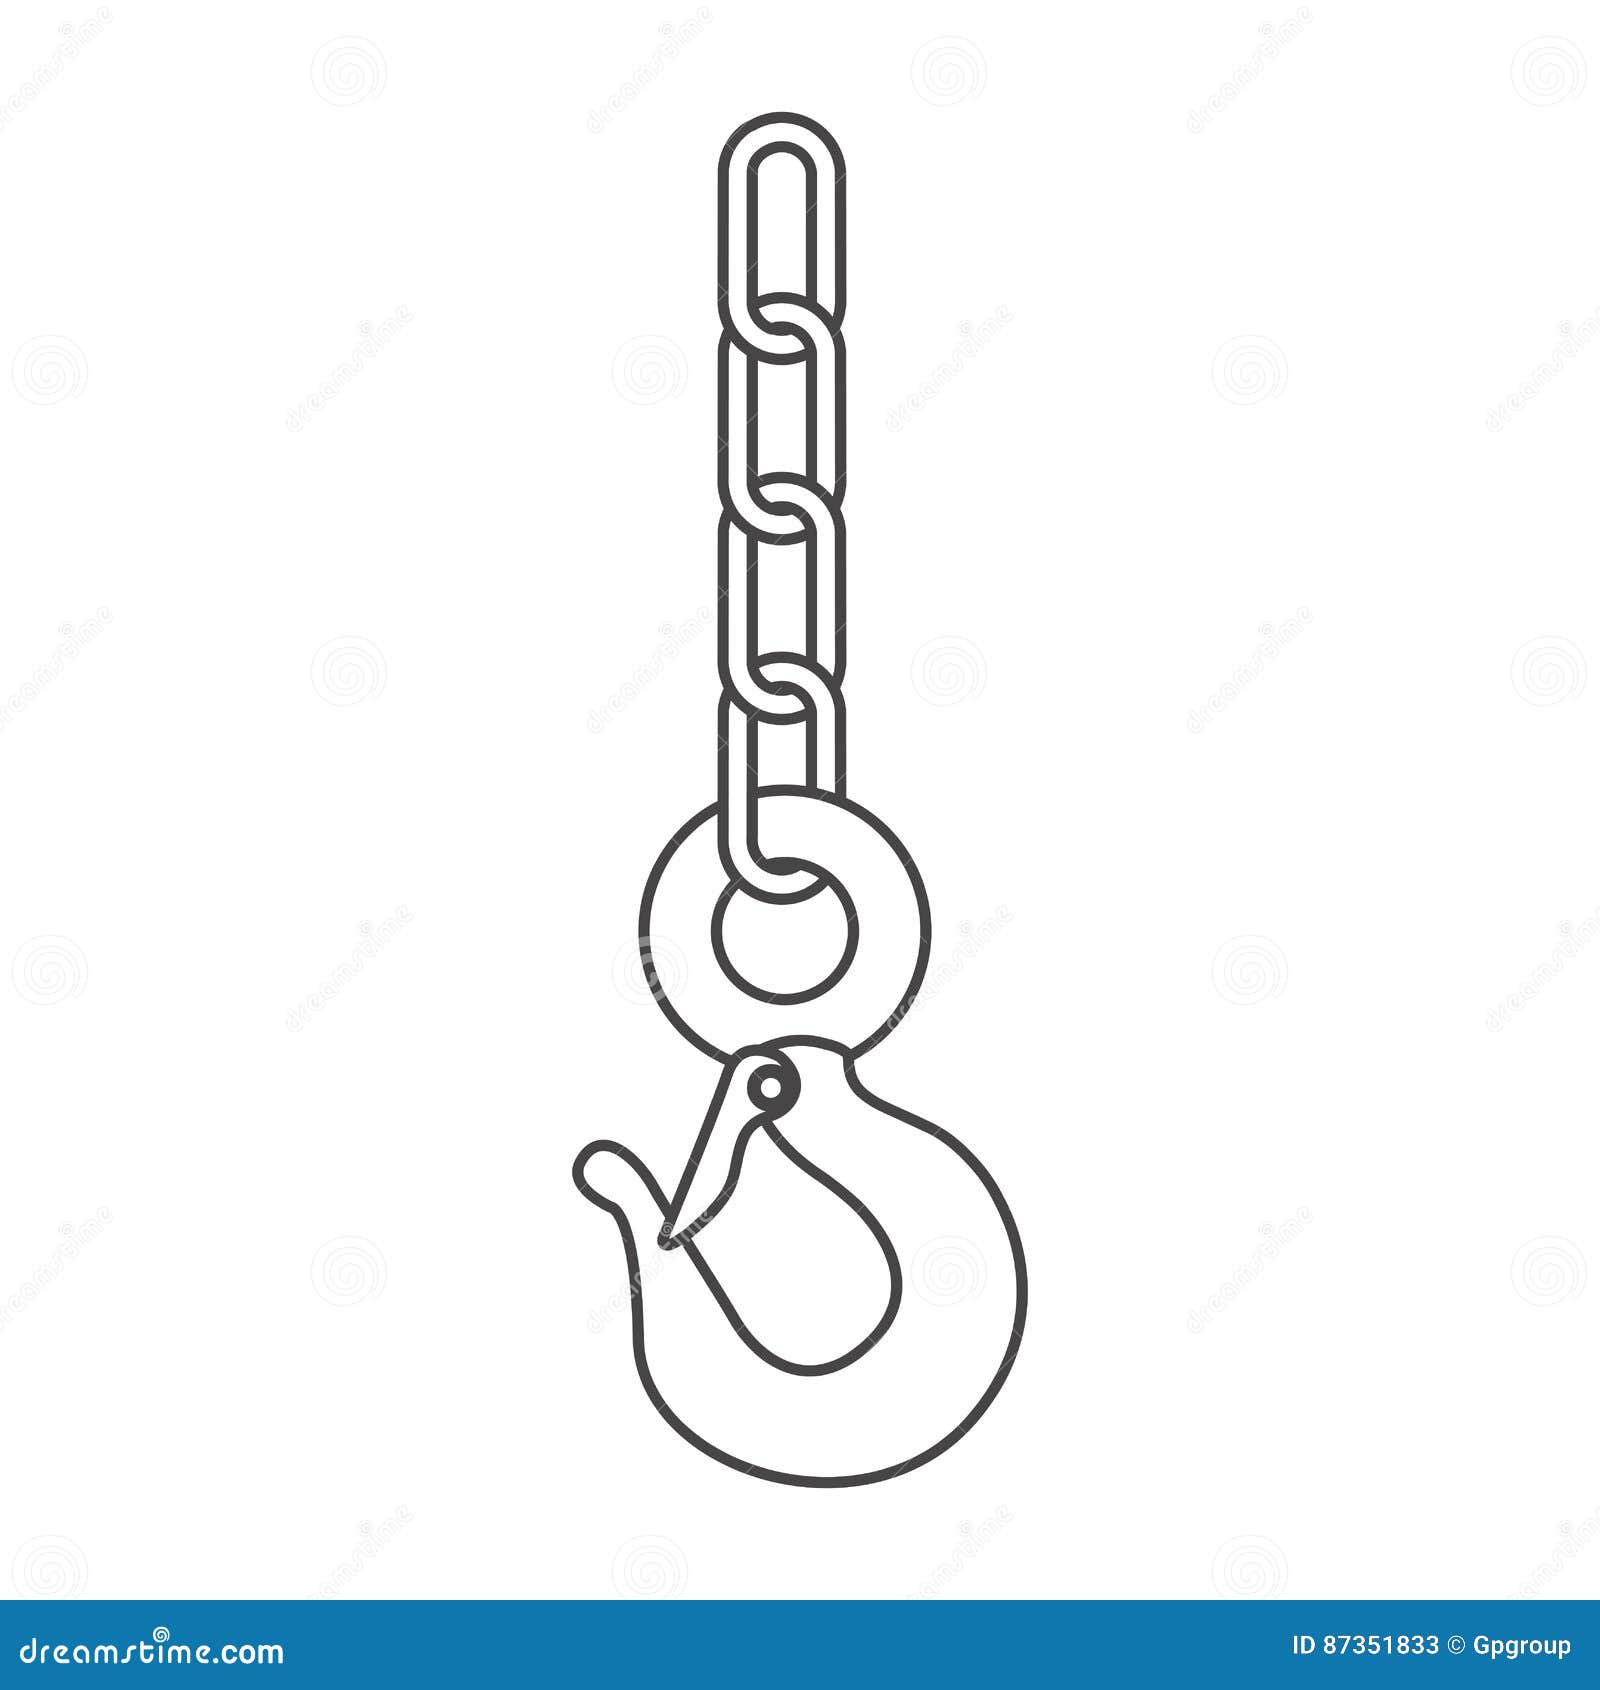 Sketch Silhouette Metallic Hook with Chain Stock Illustration ...